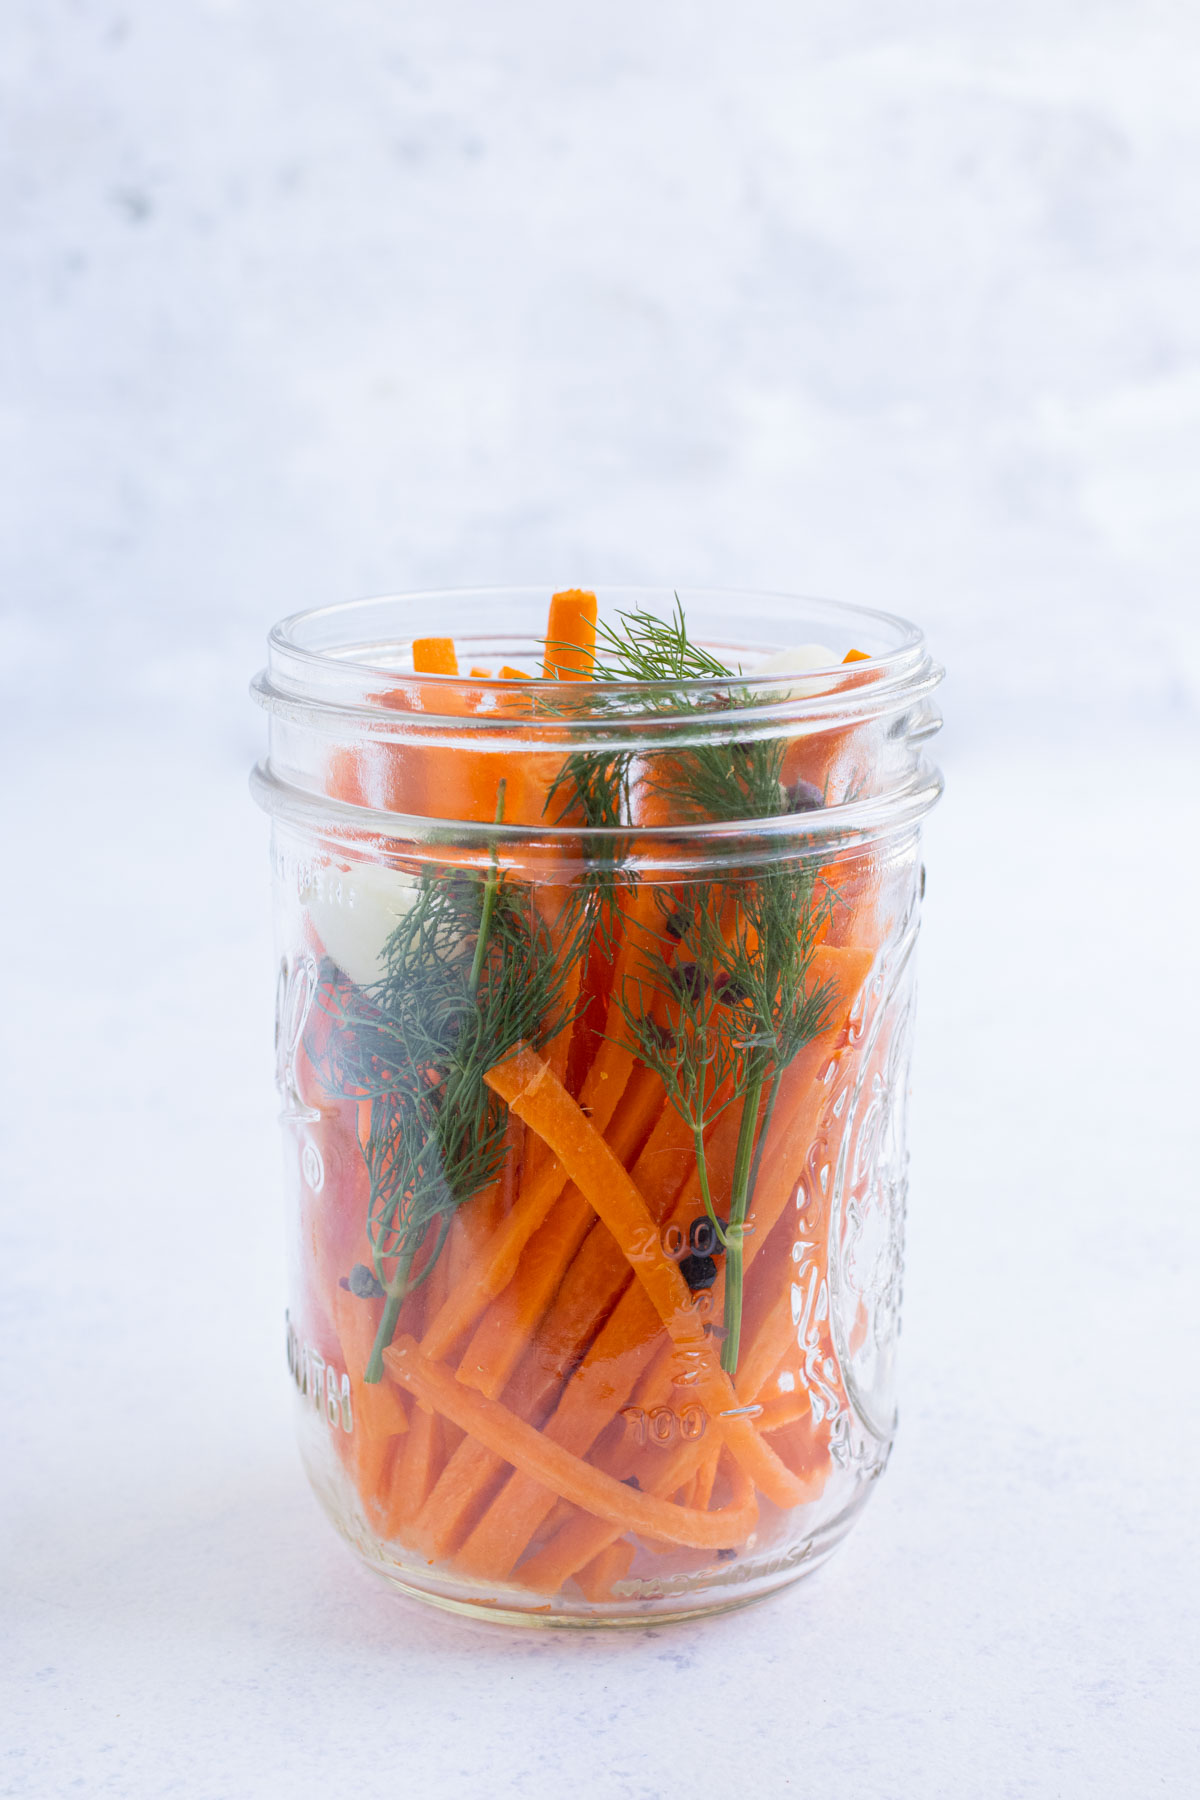 Carrots, dill, garlic, and peppercorns are in a glass jar.